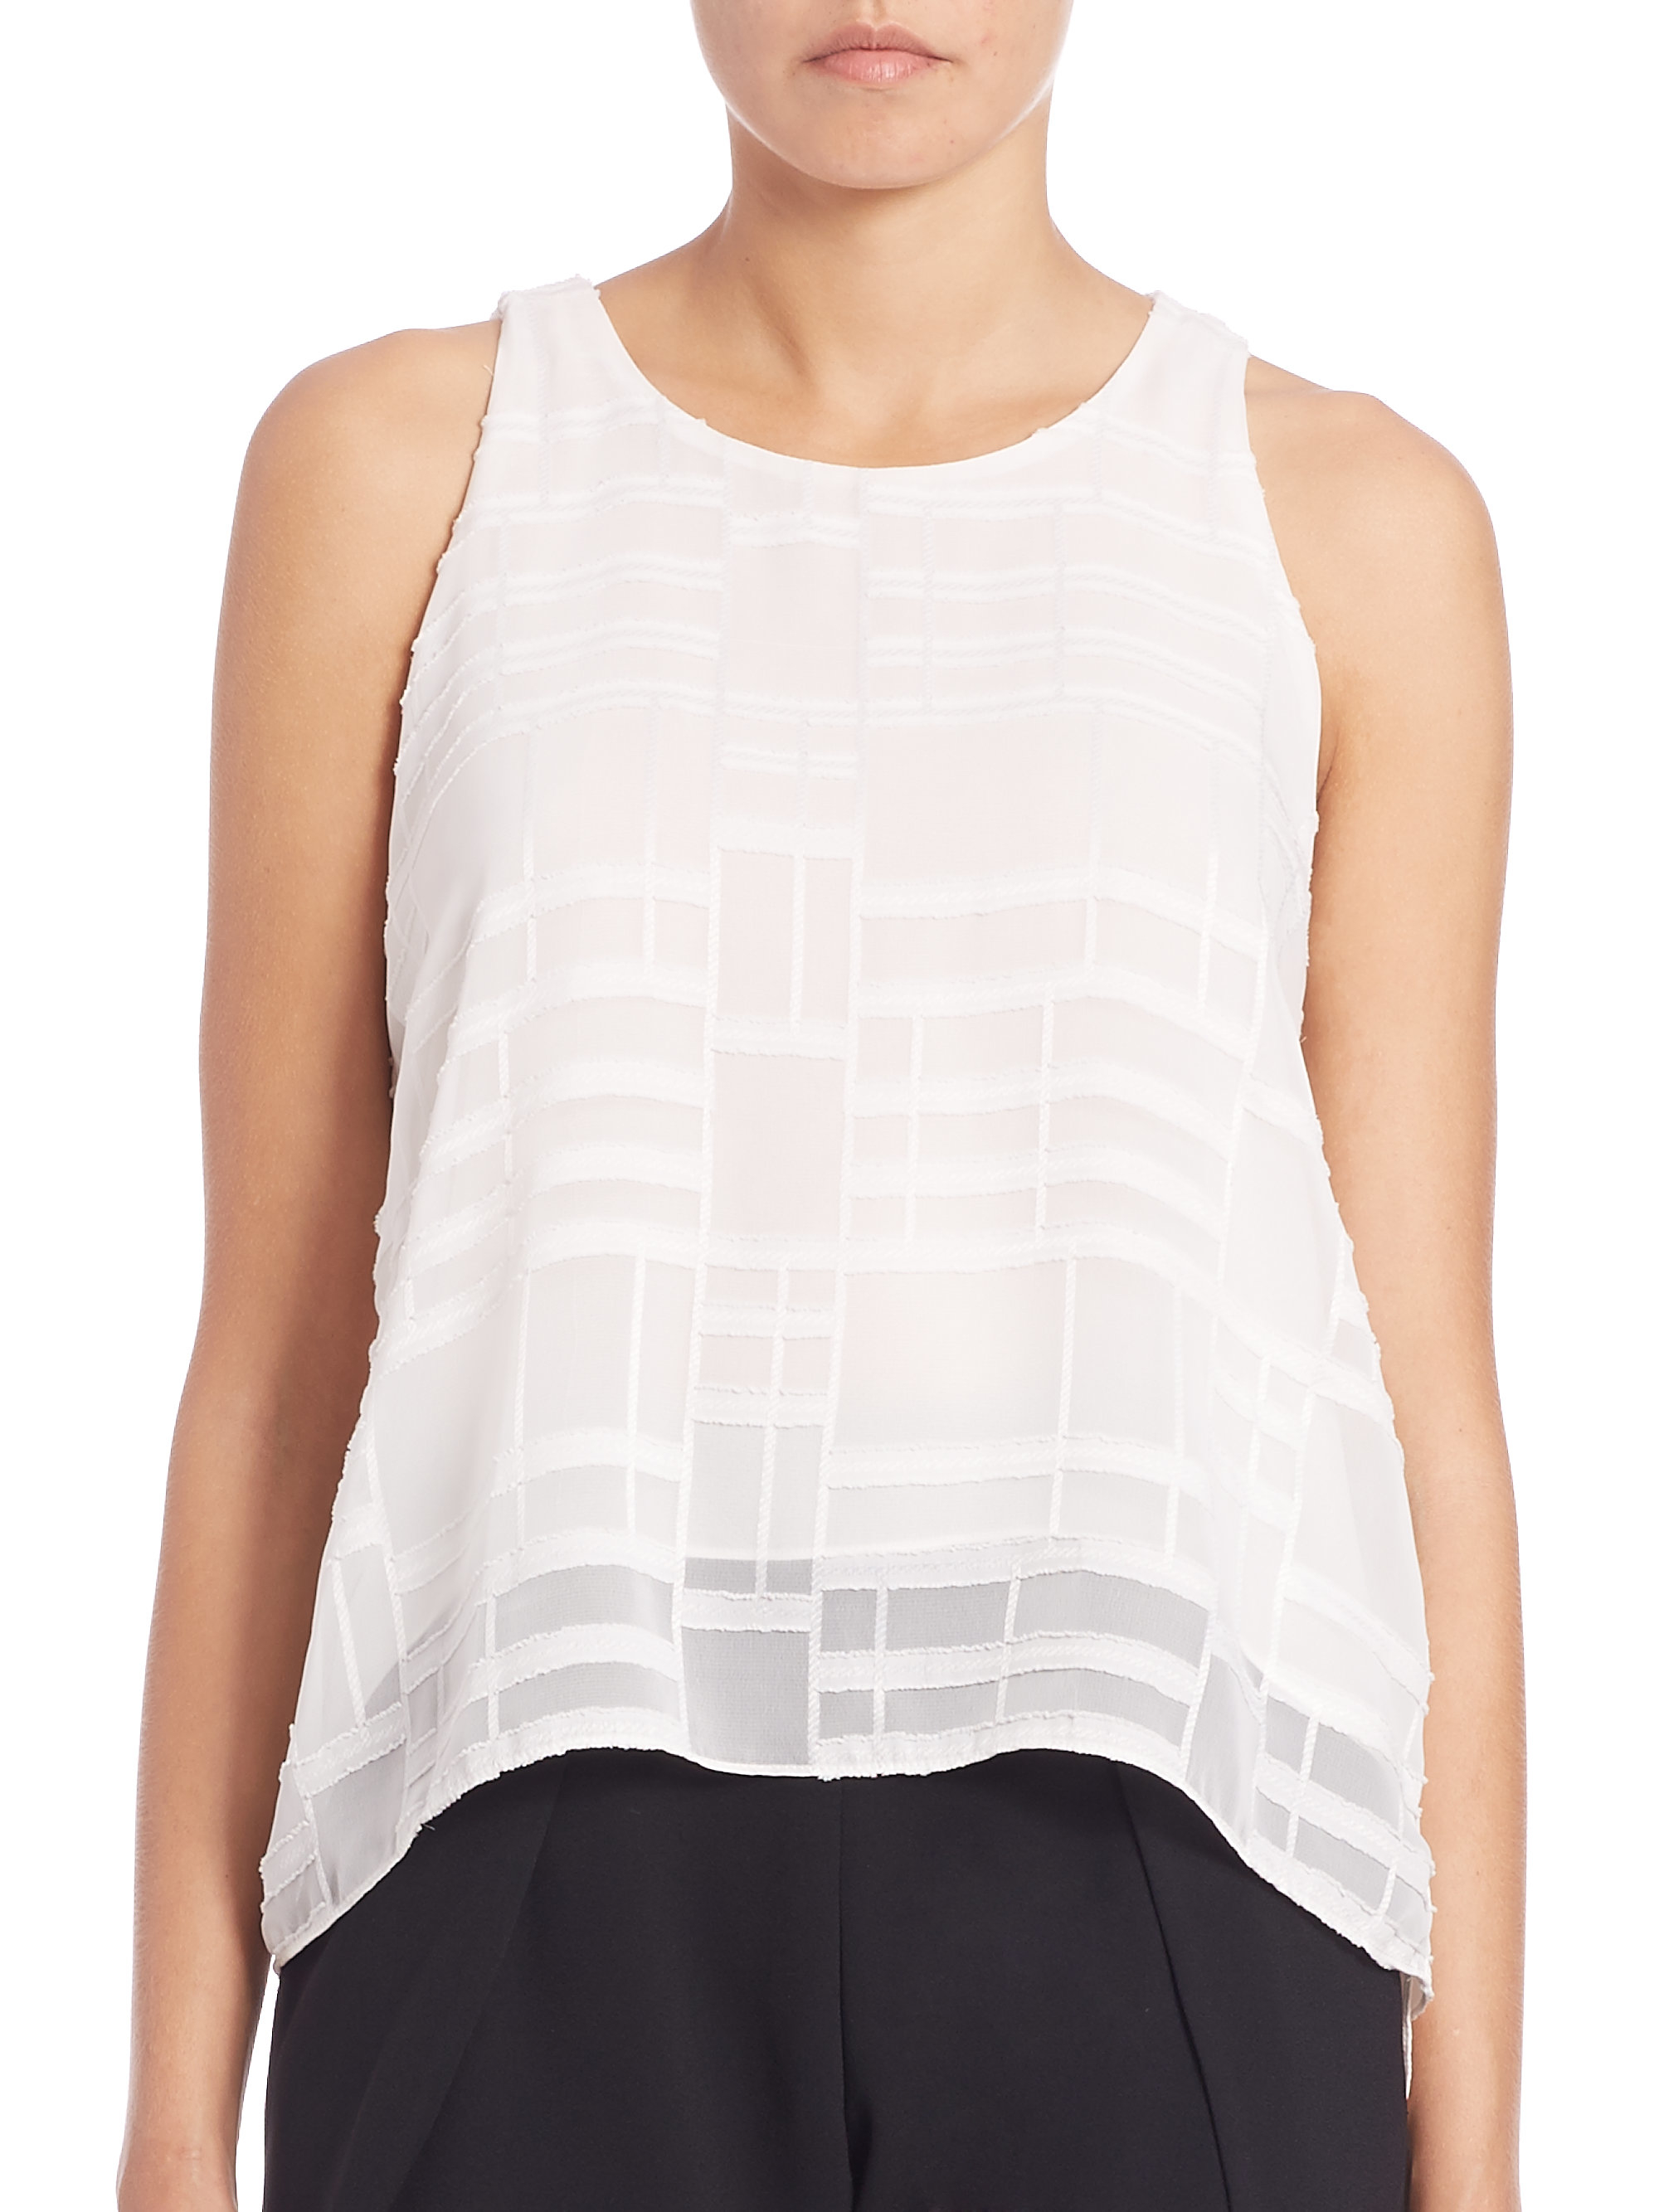 Jonathan Simkhai Lace-up Texture Tank Top in White - Lyst